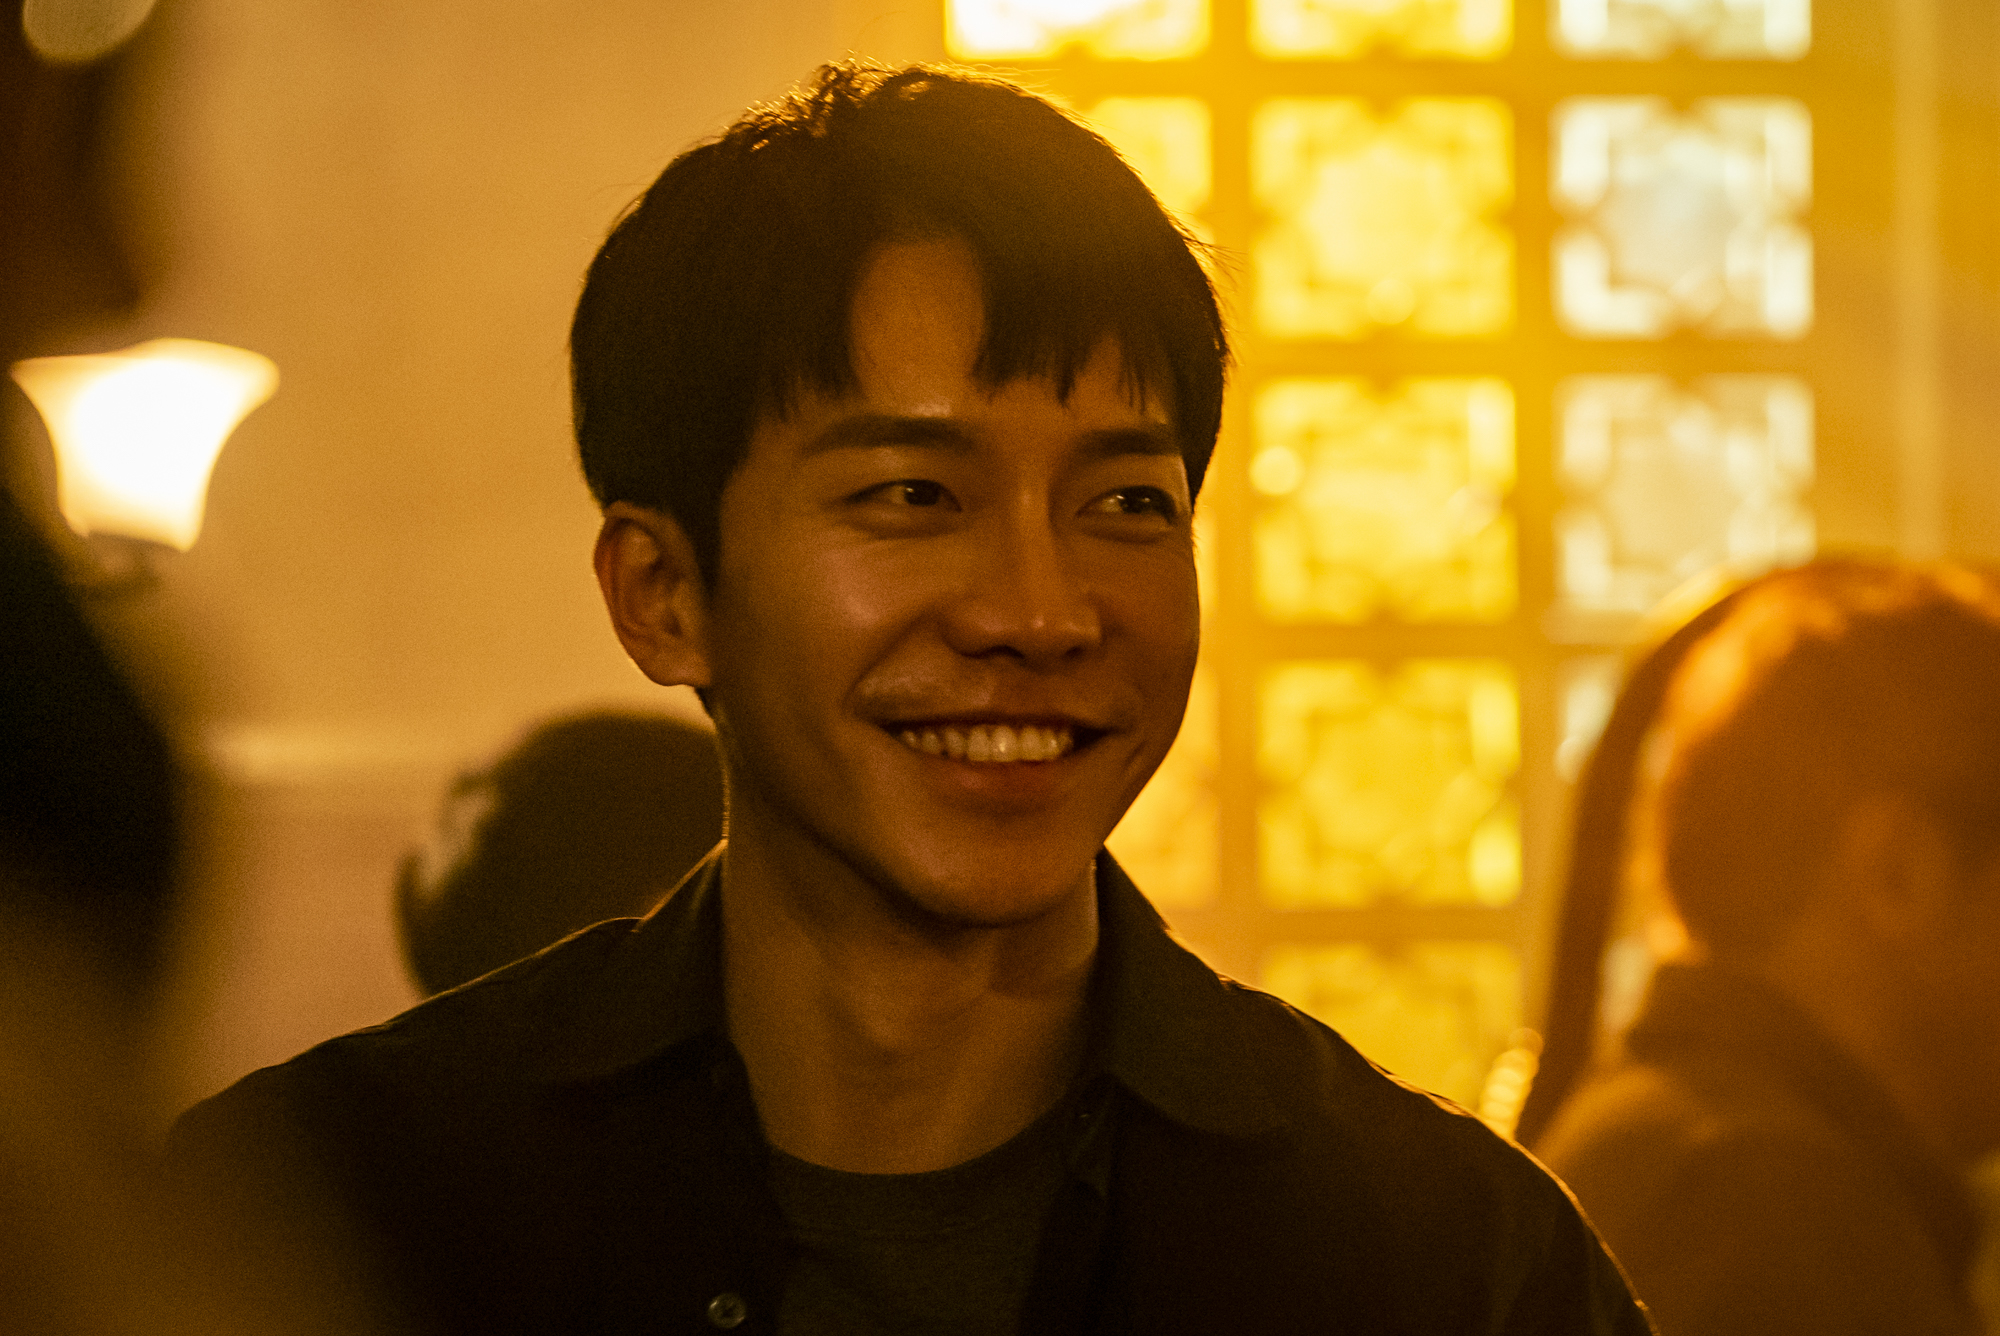 The more the five leading actors, including Vagabond Lee Seung-gi - Bae Suzy - Shin Sung-rok - Moon Jin-hee - Yun-shik Baek, who is about to air the last episode on the 23rd (Today), the more thrilling the dramas masterpieces and heart-wrenching closing remarks were shared.SBS gilt drama Vagabond (VAGABOND) (playwright Jang Young-chul Young-young-sun, director Yoo In-sik / production Celltion Healthcare Entertainment CEO Park Jae-sam) is an intelligence action melody that uncovers a huge national corruption found by a man involved in a civil-aircraft crash in a concealed truth.After a year of production, after opening the opening of the opening ceremony on September 21, the audience laughed and rang for nearly three months and left only one time to the end.With the unpredictable anti-war bombs to the end, the story of the Vagabond protagonists such as Lee Seung-gi - Bae Suzy - Shin Sung-rok - Moon Jin-hee - Yun-shik Baek, I asked for ease.Lee Seung-gi, who played Cha Dal-gun, a stuntman who ran unreservedly to dig up the plot and truth about his nephews death, said, It is hard to extract only one screen because it was a very intense work, but the first chase ending scene comes to mind. I think it was a rich scene that showed a lot of things to see in a compact but speedy manner. I am proud to tell you that many people around me have enjoyed it, he said. I am grateful to the stuntman team who made Yoo In-sik, director Lee Gil-bok, director Jang Young-chul, writer Jeong Gyeong-sun, senior actors, and Cha Dal-gun more brilliant.I think it was the staff who had been silently struggling behind the scenes that could have ended safely without hurting any one, even though there were many dangerous action gods.I will try to find viewers in a better way in the future. He said that he felt responsible and strong like Cha Dal-gun in the drama.Bae Suzy, who sometimes showed off his charm of calming and passion in the heart of the NIS black agent Gohari, said, I am fortunate to have a memory of the screen that keeps the bereaved families from the whole body so that they can go in front of the courthouse. Its ene.Vagabonds message of healing seemed to be implicit in the screen, he said. There were many moments when my heart got hot as I took a picture of VagabondI was happy to be able to work with good seniors and good staff, and I think I will stay in Memory for a long time because it was a place to learn a lot. Shin Sung-rok, who boasted his charisma as a cool and intelligent NIS inspector, Kiwoong, cited the large shooting scene completed in Morocco as the most memorable scene.Its true that the car was overthrown, bullets were rampant, bombs were blown up, and the risk was high, but it was a new experience because there were not many opportunities to take a large scale screen like this, he said, expressing satisfaction with the fact that particularly decent Kitaewoong has changed characters that explode anger and face aggressively, leaving it in a MemoryThank you for your love of Vagabond, and I am satisfied with your new attempt and thank you for your many.It is a work that is more expected next, he said.Moon Jin-hee, who made a successful acting transformation as a weapons lobbyist and femme Fatale Jessica, said, The first time, the action scene that Cha Dal-gun chases after confronting the terrorist Jerome is Memory.I admired the spectacular scale of snow and the action in exotic cities, he said.If you choose one more thing, Jessica and Oh Sang-mis container Blackmail - Cinémix Par Chloé scene comes to mind, she laughed, and Jessica Lee, who was a friendly business woman, turned into a blackmail - Cinémix Par Chloé, Because I felt it was a response.Moy Yat was also happy to shoot Vagabond.I would be really happy if I had another chance to be with the best staff and Actor. Yun-shik Baek, who played the role of President Chung Kook-pyo of the Republic of Korea and gave an overwhelming presence, said, How can I say only one screen?All the screens were all famous. He said, One scene, I give all my gratitude and glory to the younger actors who have completed the masters by pouring infinite passion without dealing with it.It was a great time to be able to be with good staff and good juniors. Celltrion Healthcare Entertainment said, Thanks to all the actors souls, the work was able to cruise smoothly.I would like to express my deep gratitude, he said, and I did my best to the end. I hope you enjoy the Vagabond to the end.Meanwhile, the final episode of Vagabond will air at 10 p.m. on the 23rd (tonight).iMBC  Photo Celltrion Healthcare Entertainment